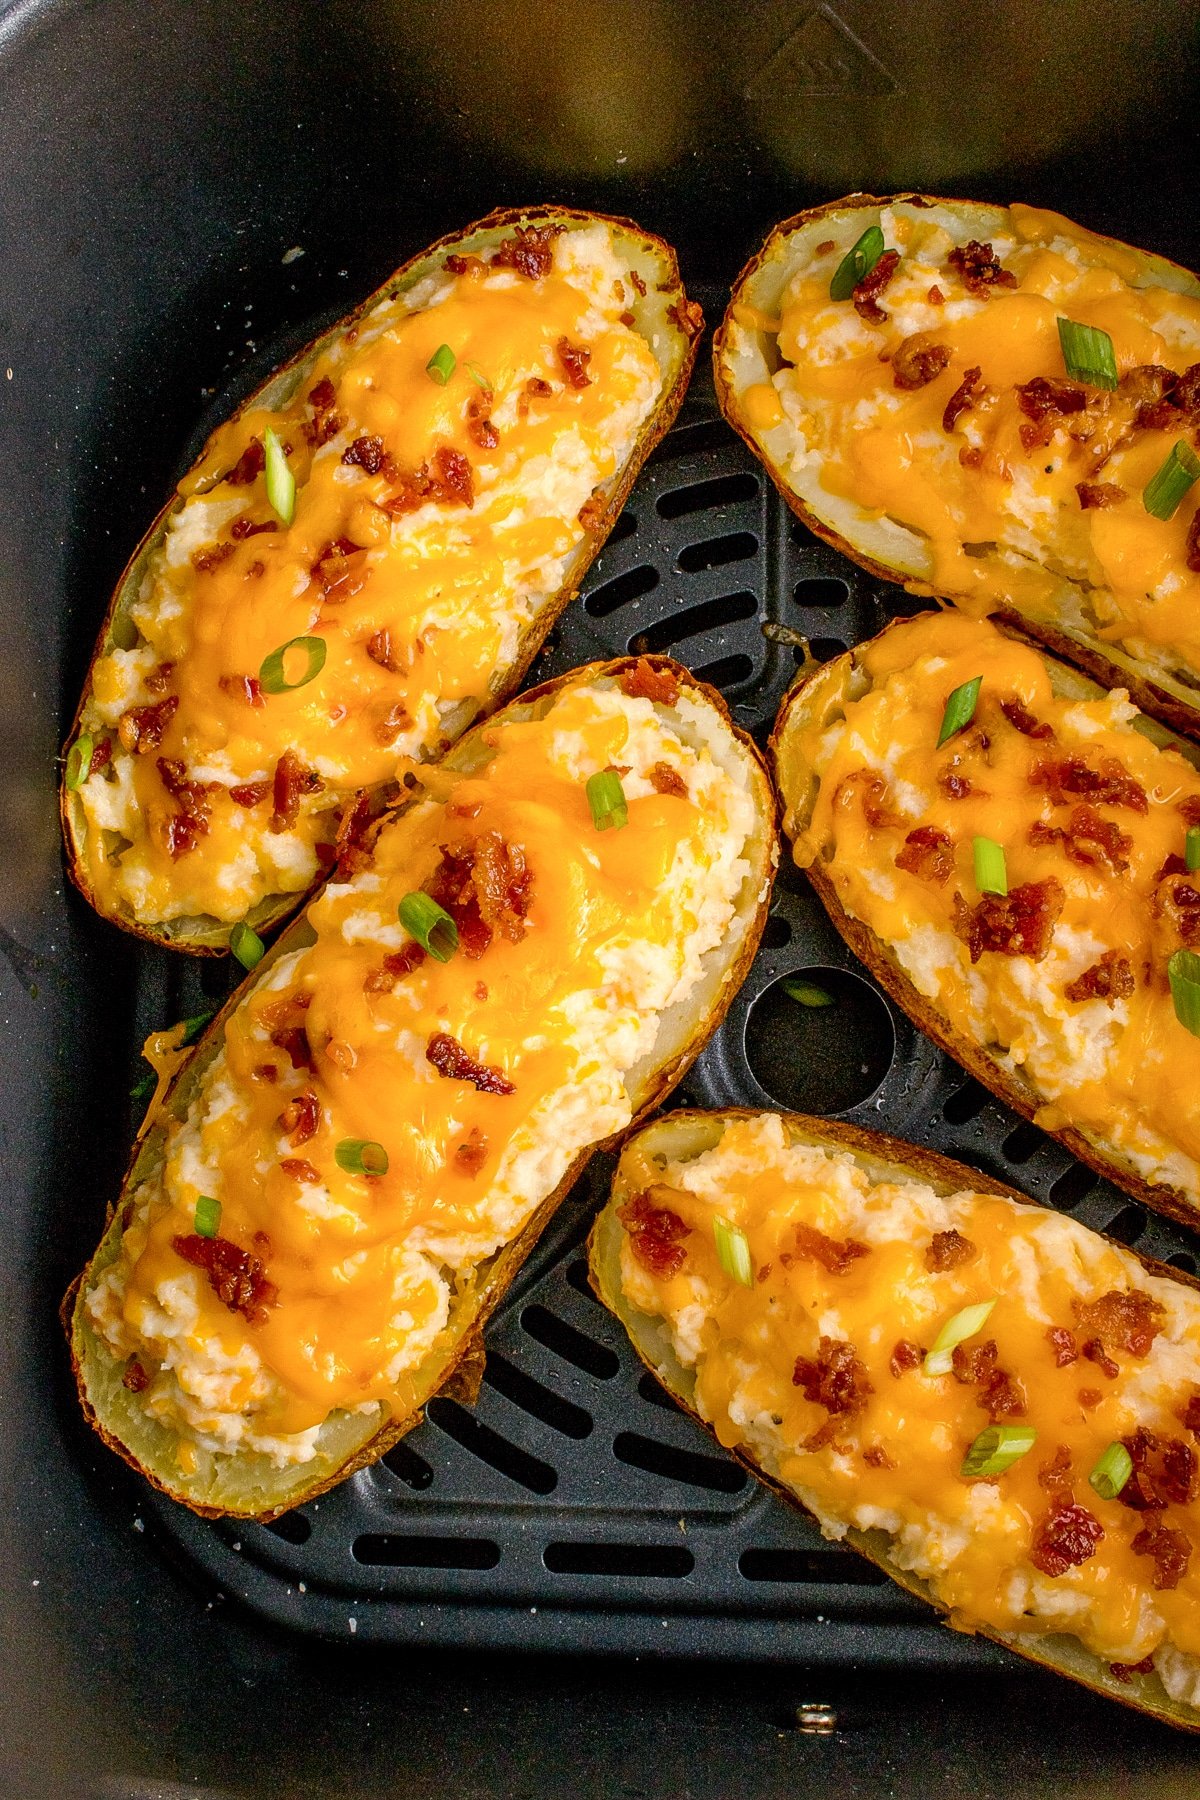 An air fryer basket filled with 5 potato halves filled with a cheesy and bacon topped filling.